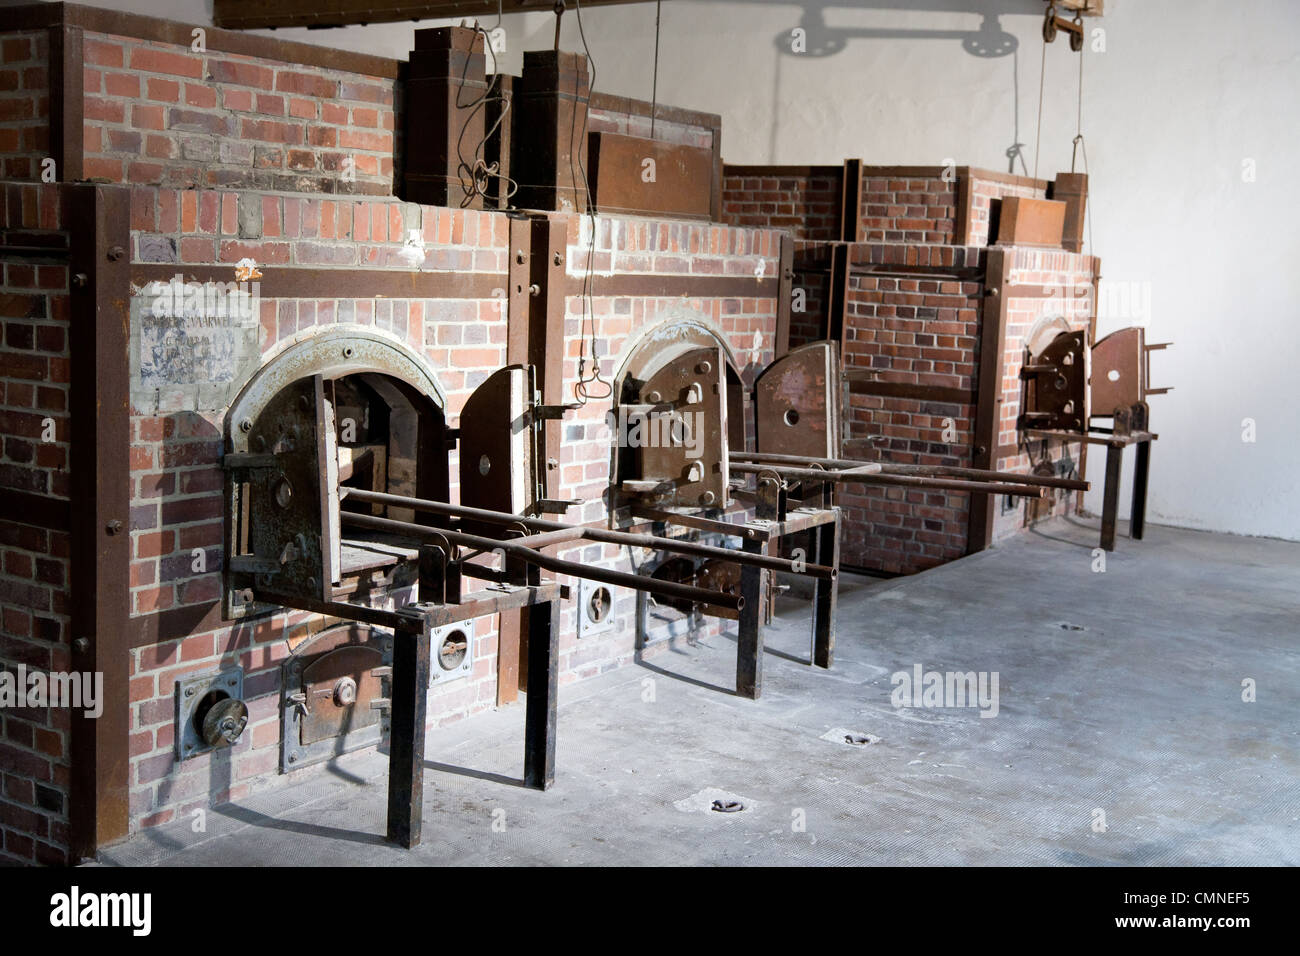 Row of incinerator ovens at Dachau Concentration Camp, Bavaria, Germany. Stock Photo